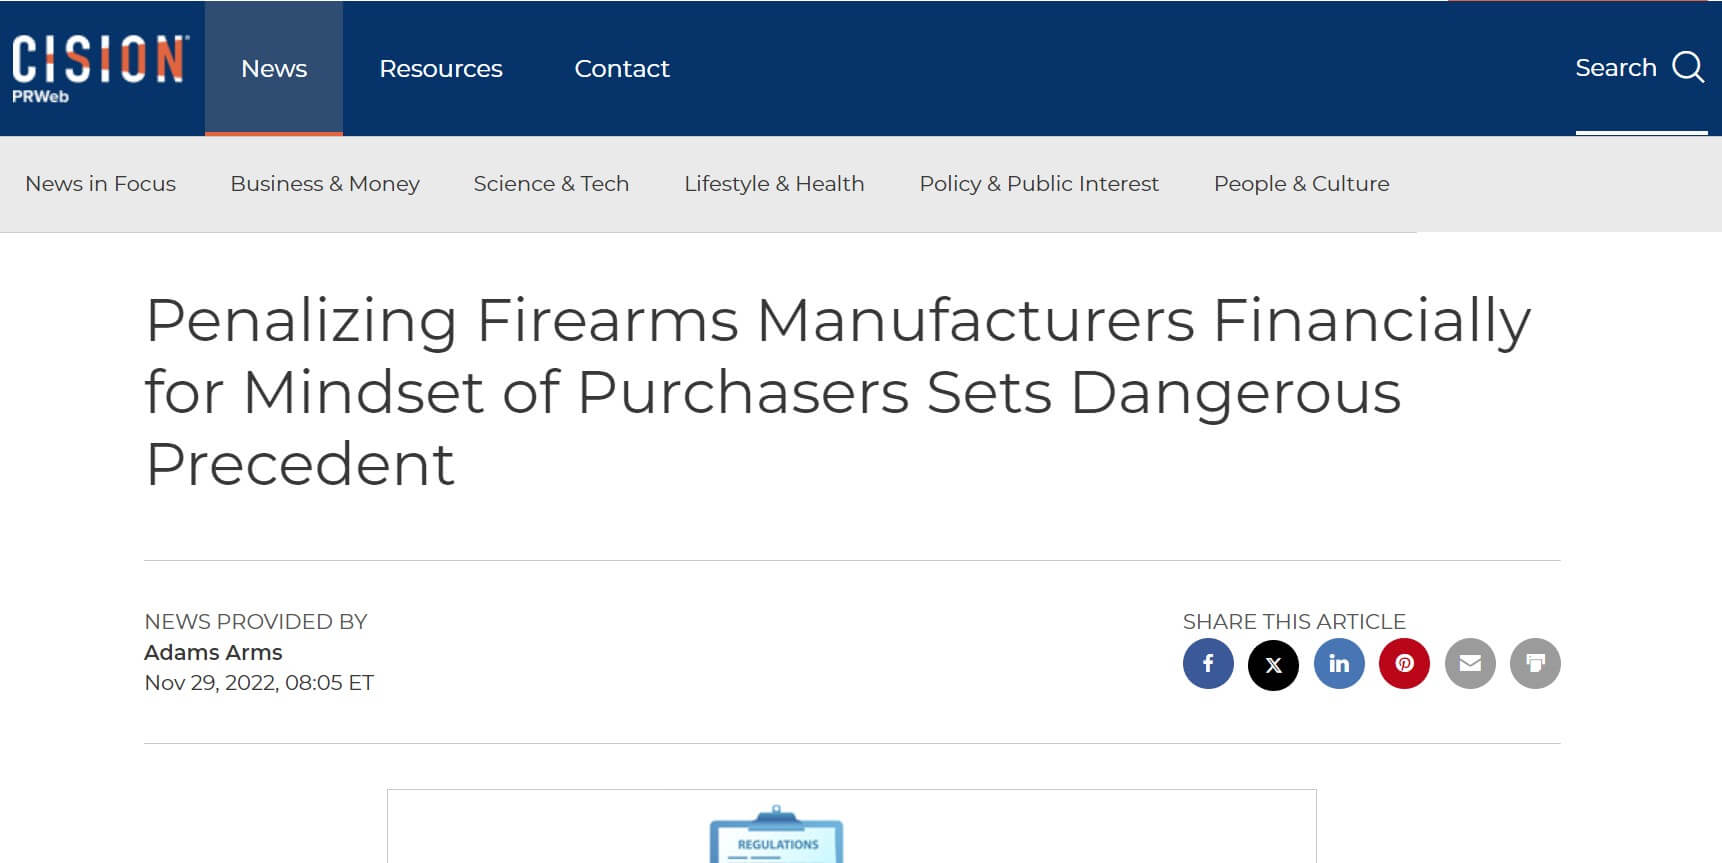 Cision news article: Penalizing Firearms Manufacturers Financially for Mindset of Purchasers Sets Dangerous Precedent